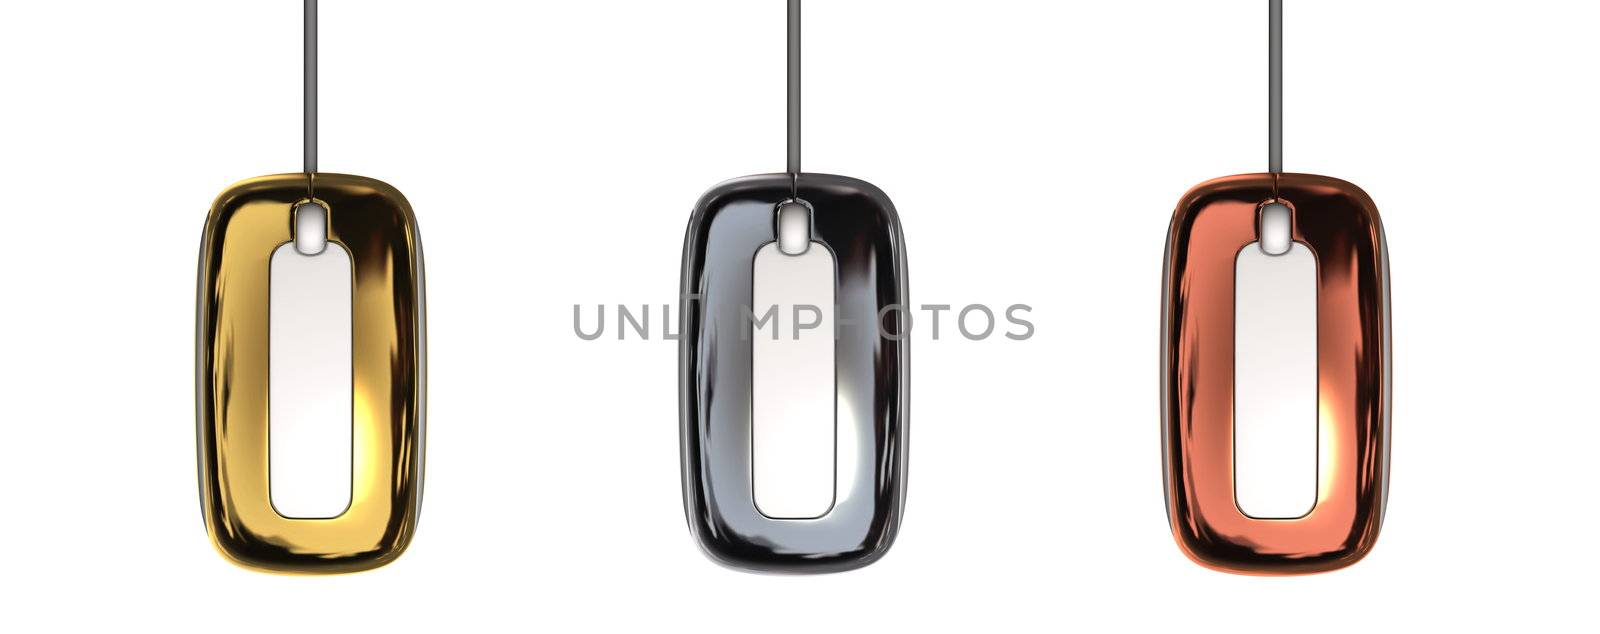 topview of three modern computer mice in different colours - gold, silver, bronze